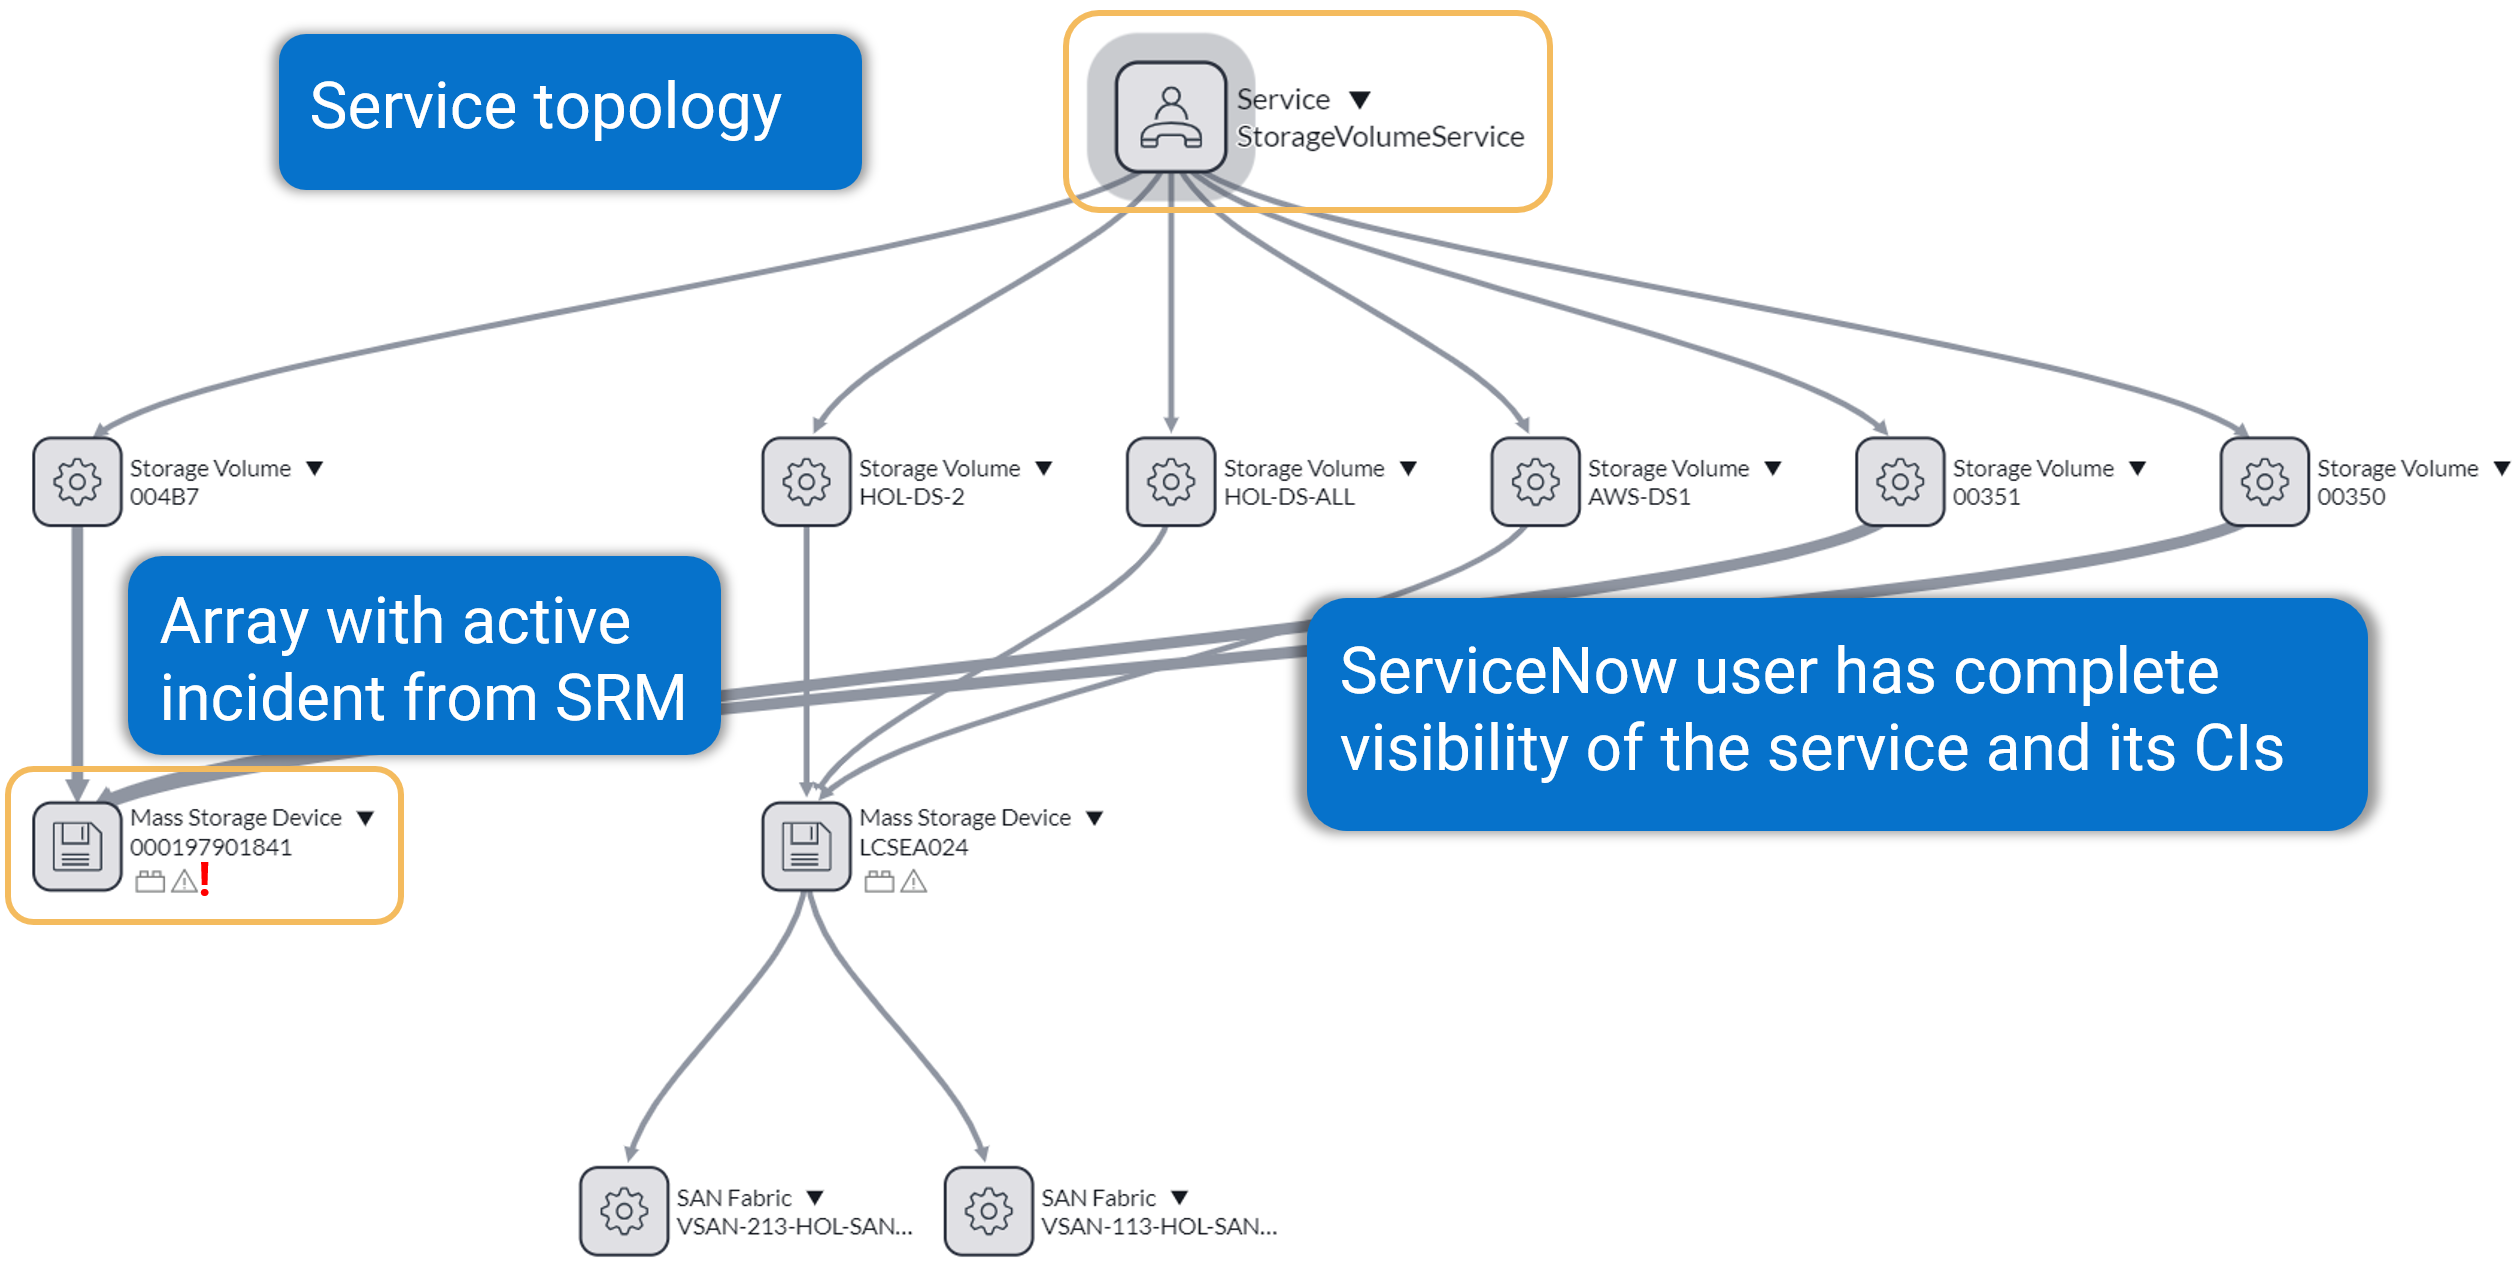 This diagram shows the end-to-end service topology in ServiceNow, which has CIs and relationships imported from SRM with associated active incidents received from the SRM. This includes an array with active incidents from the SRM.